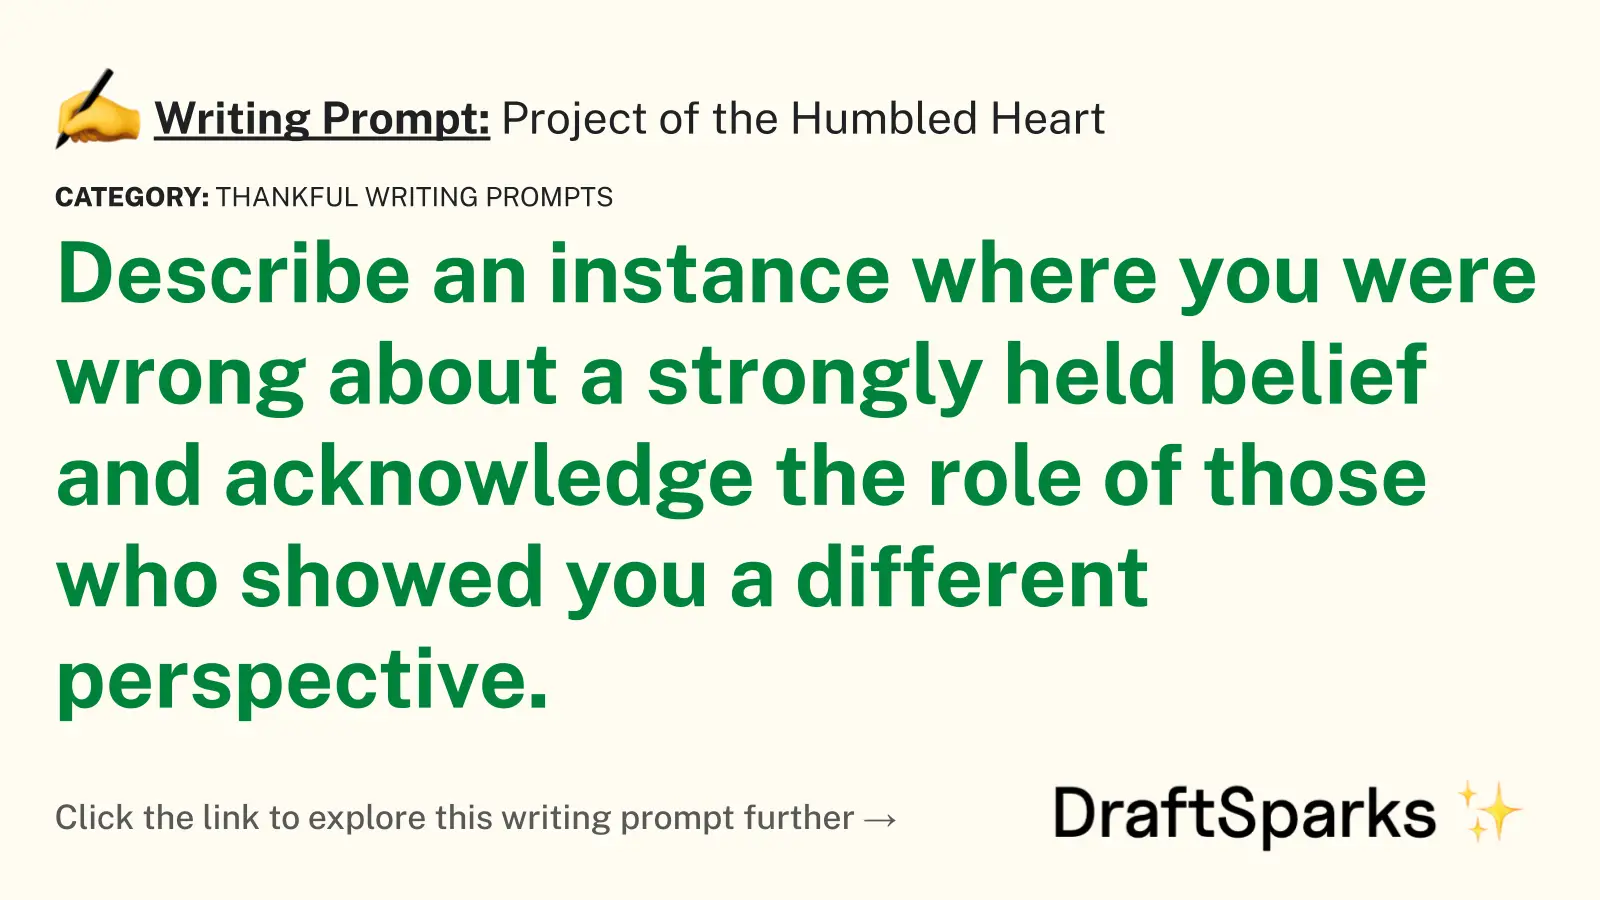 Project of the Humbled Heart